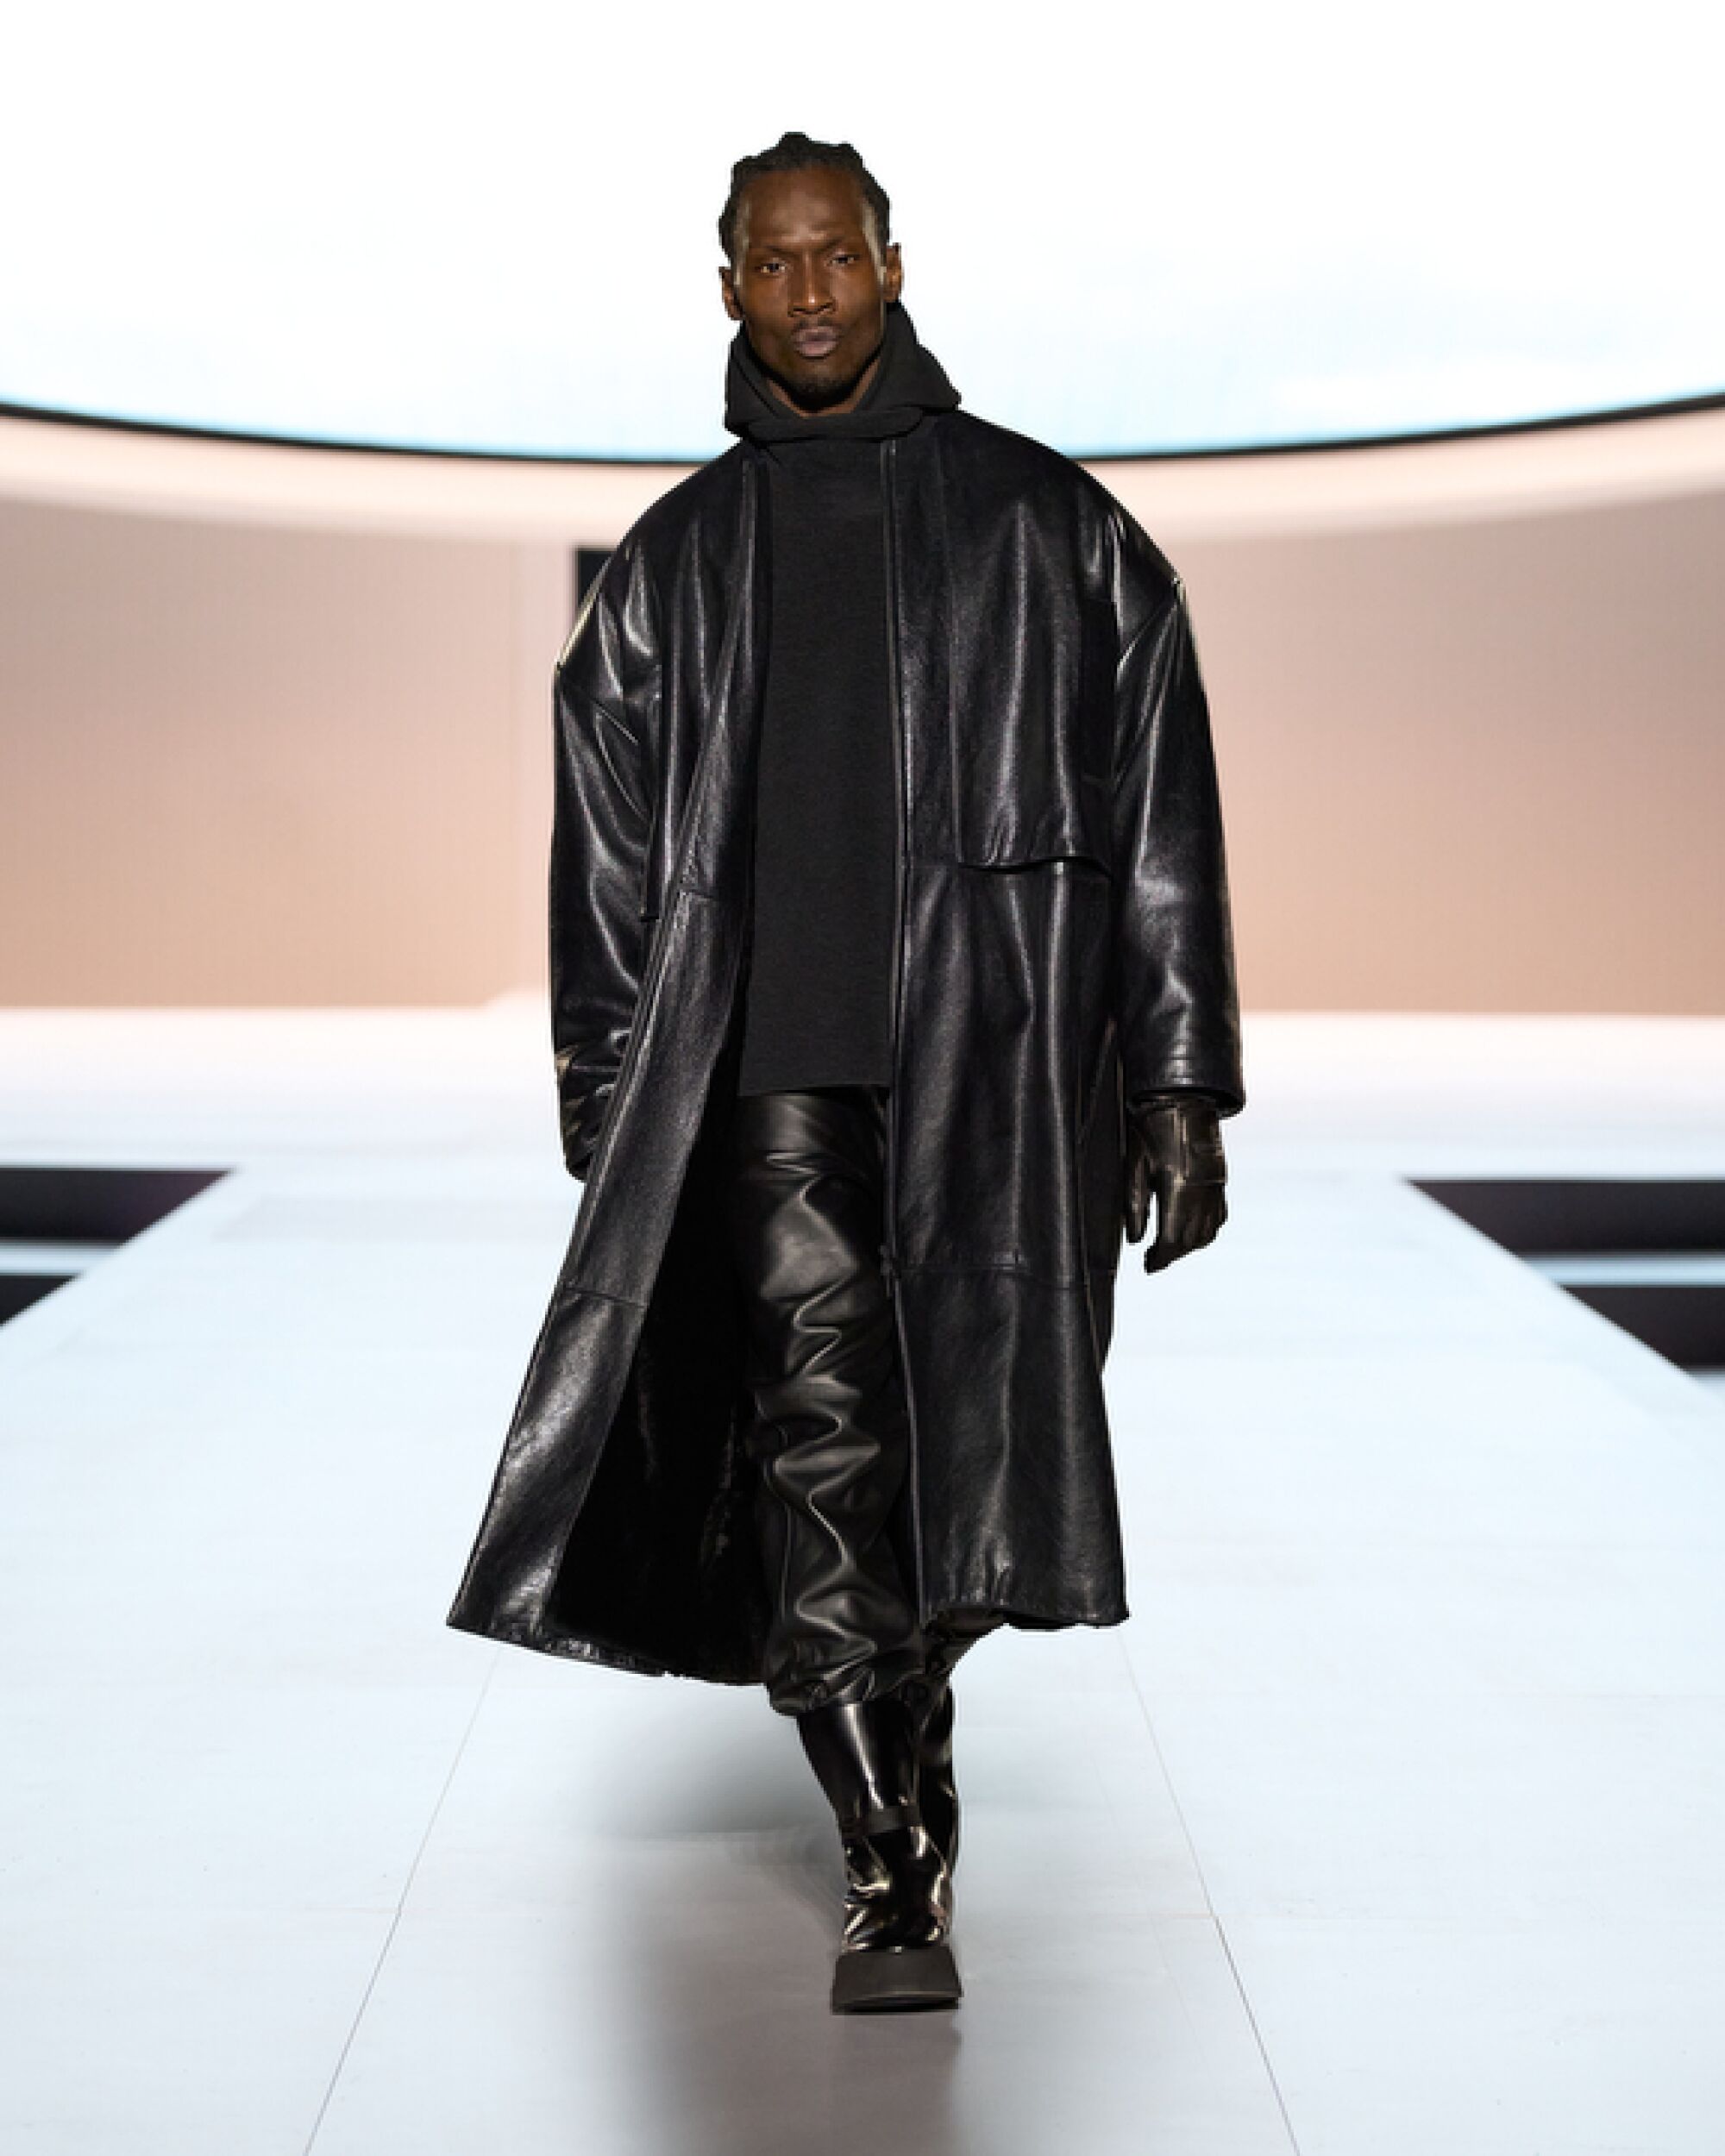 Model wears black leather outfit on runway.